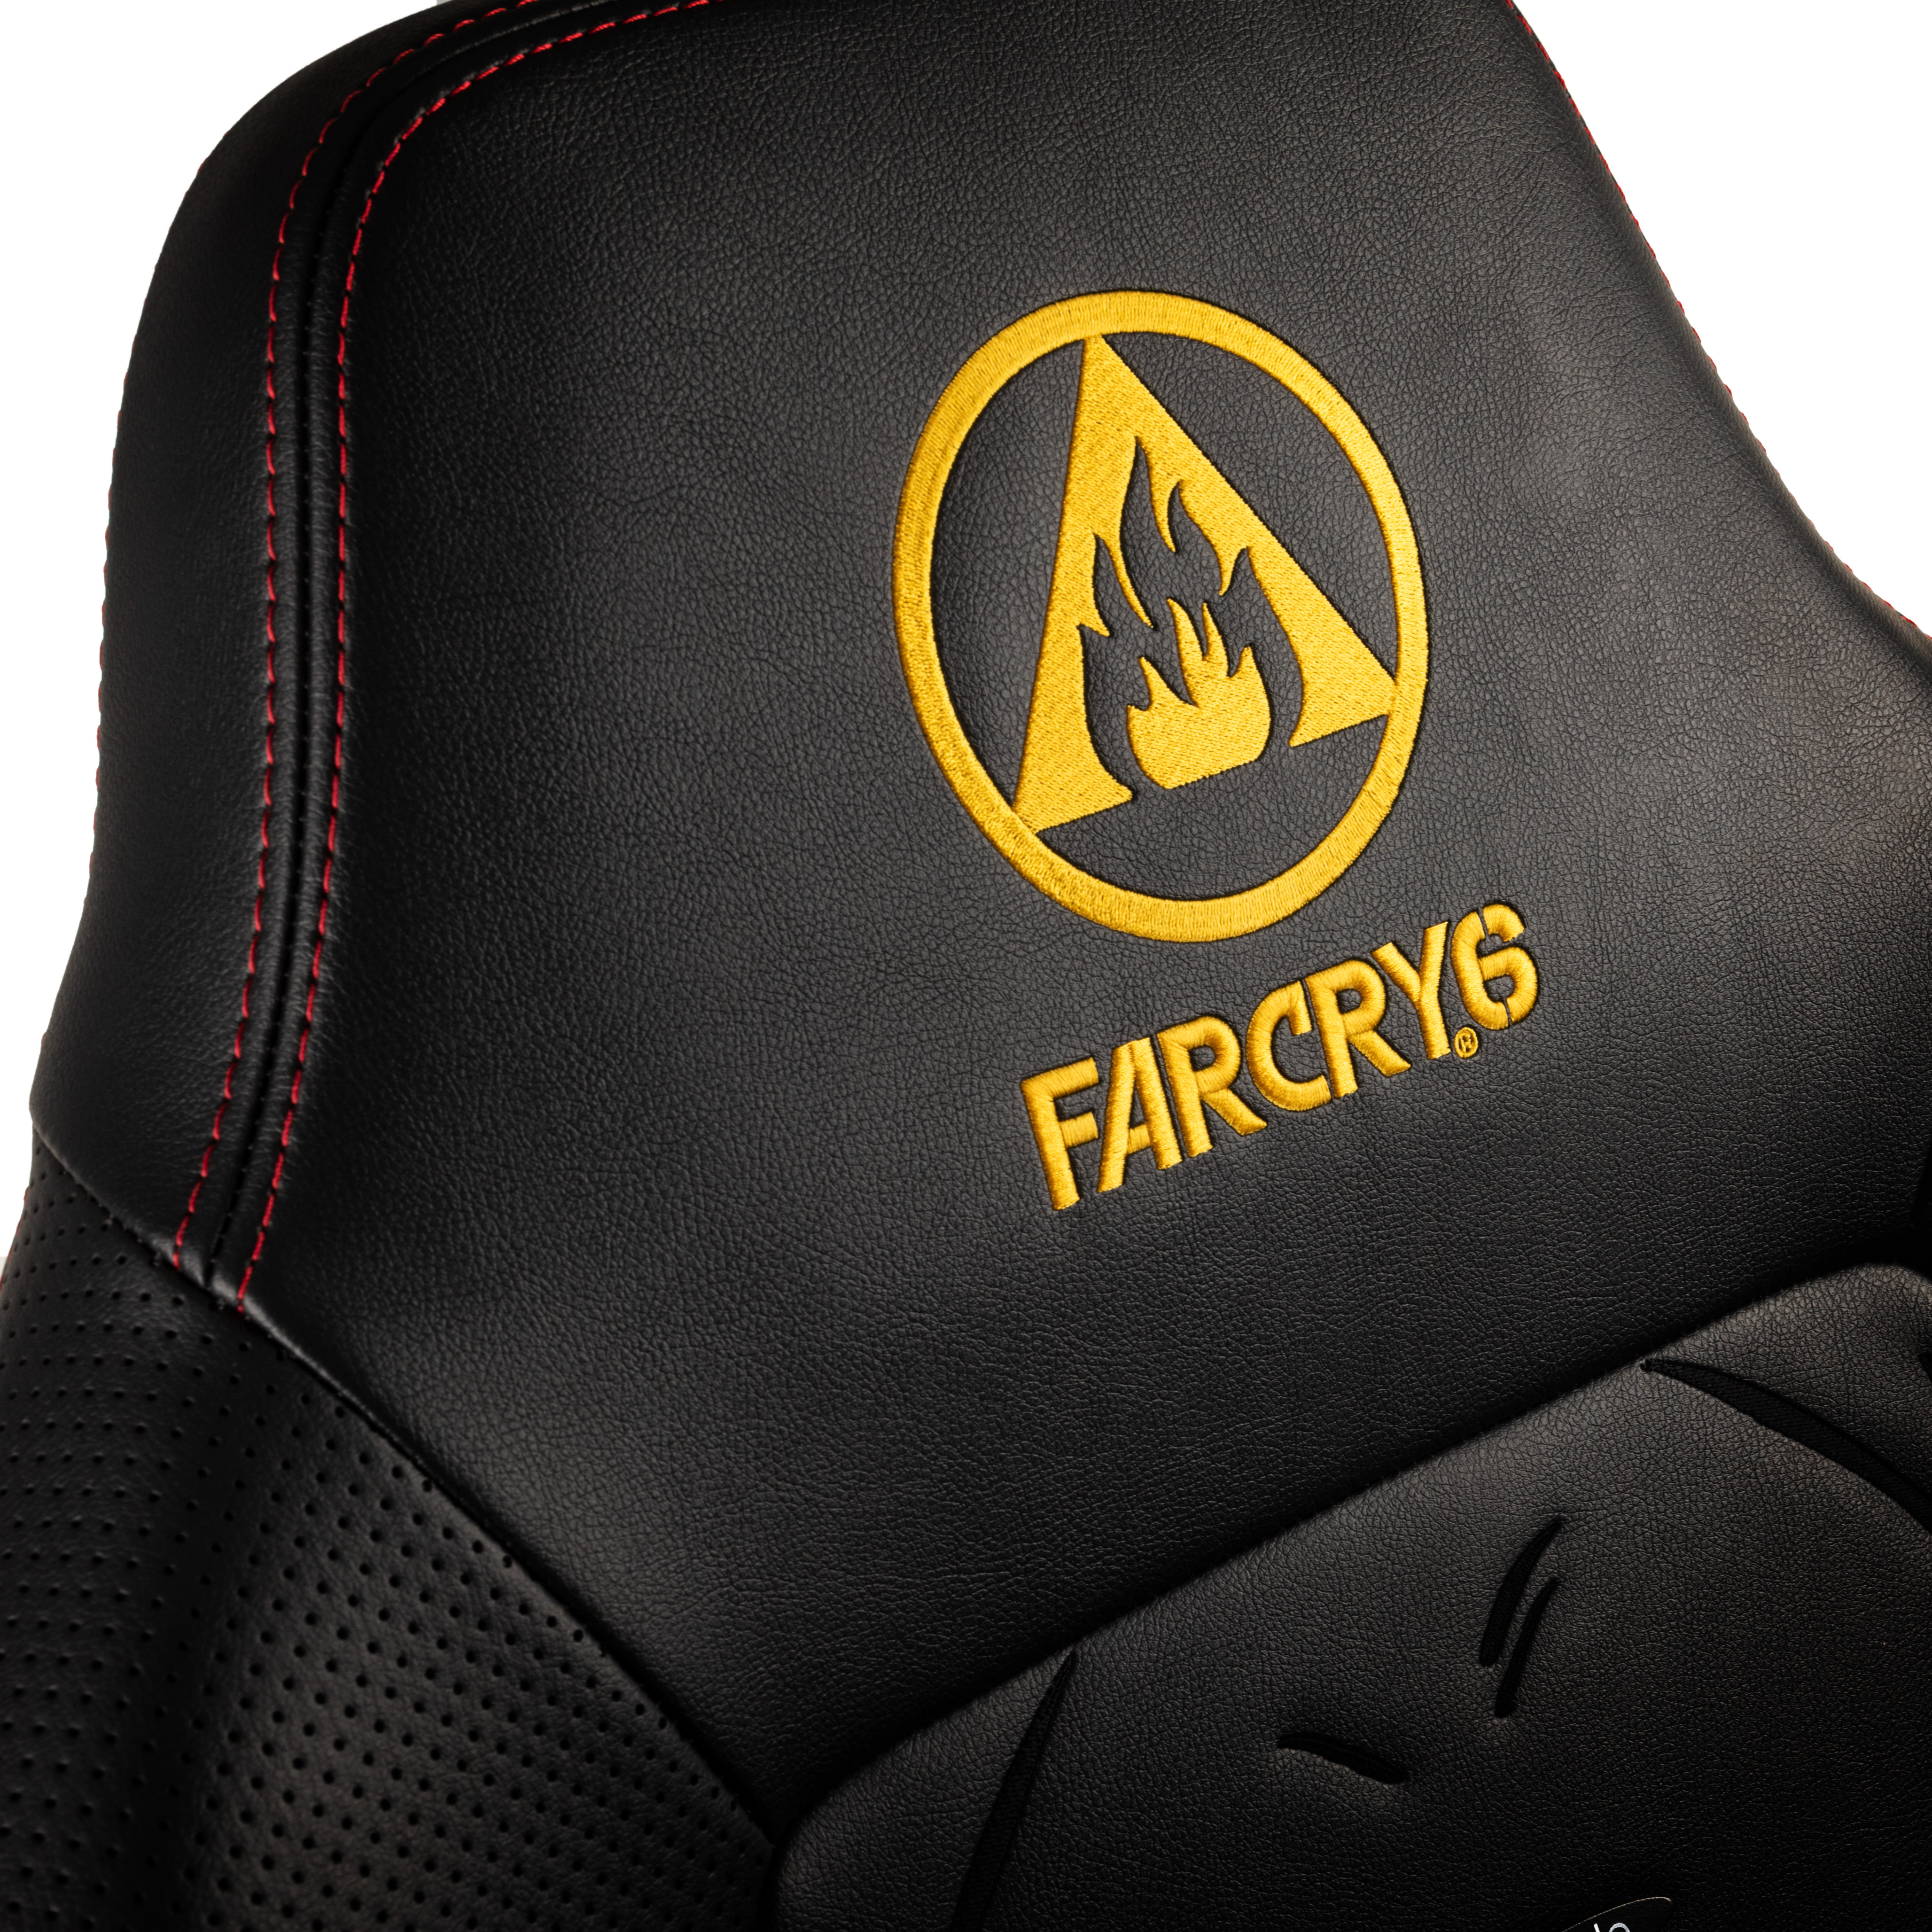 Gaming Chair noblechairs HERO Far Cry 6 Special Special Edition